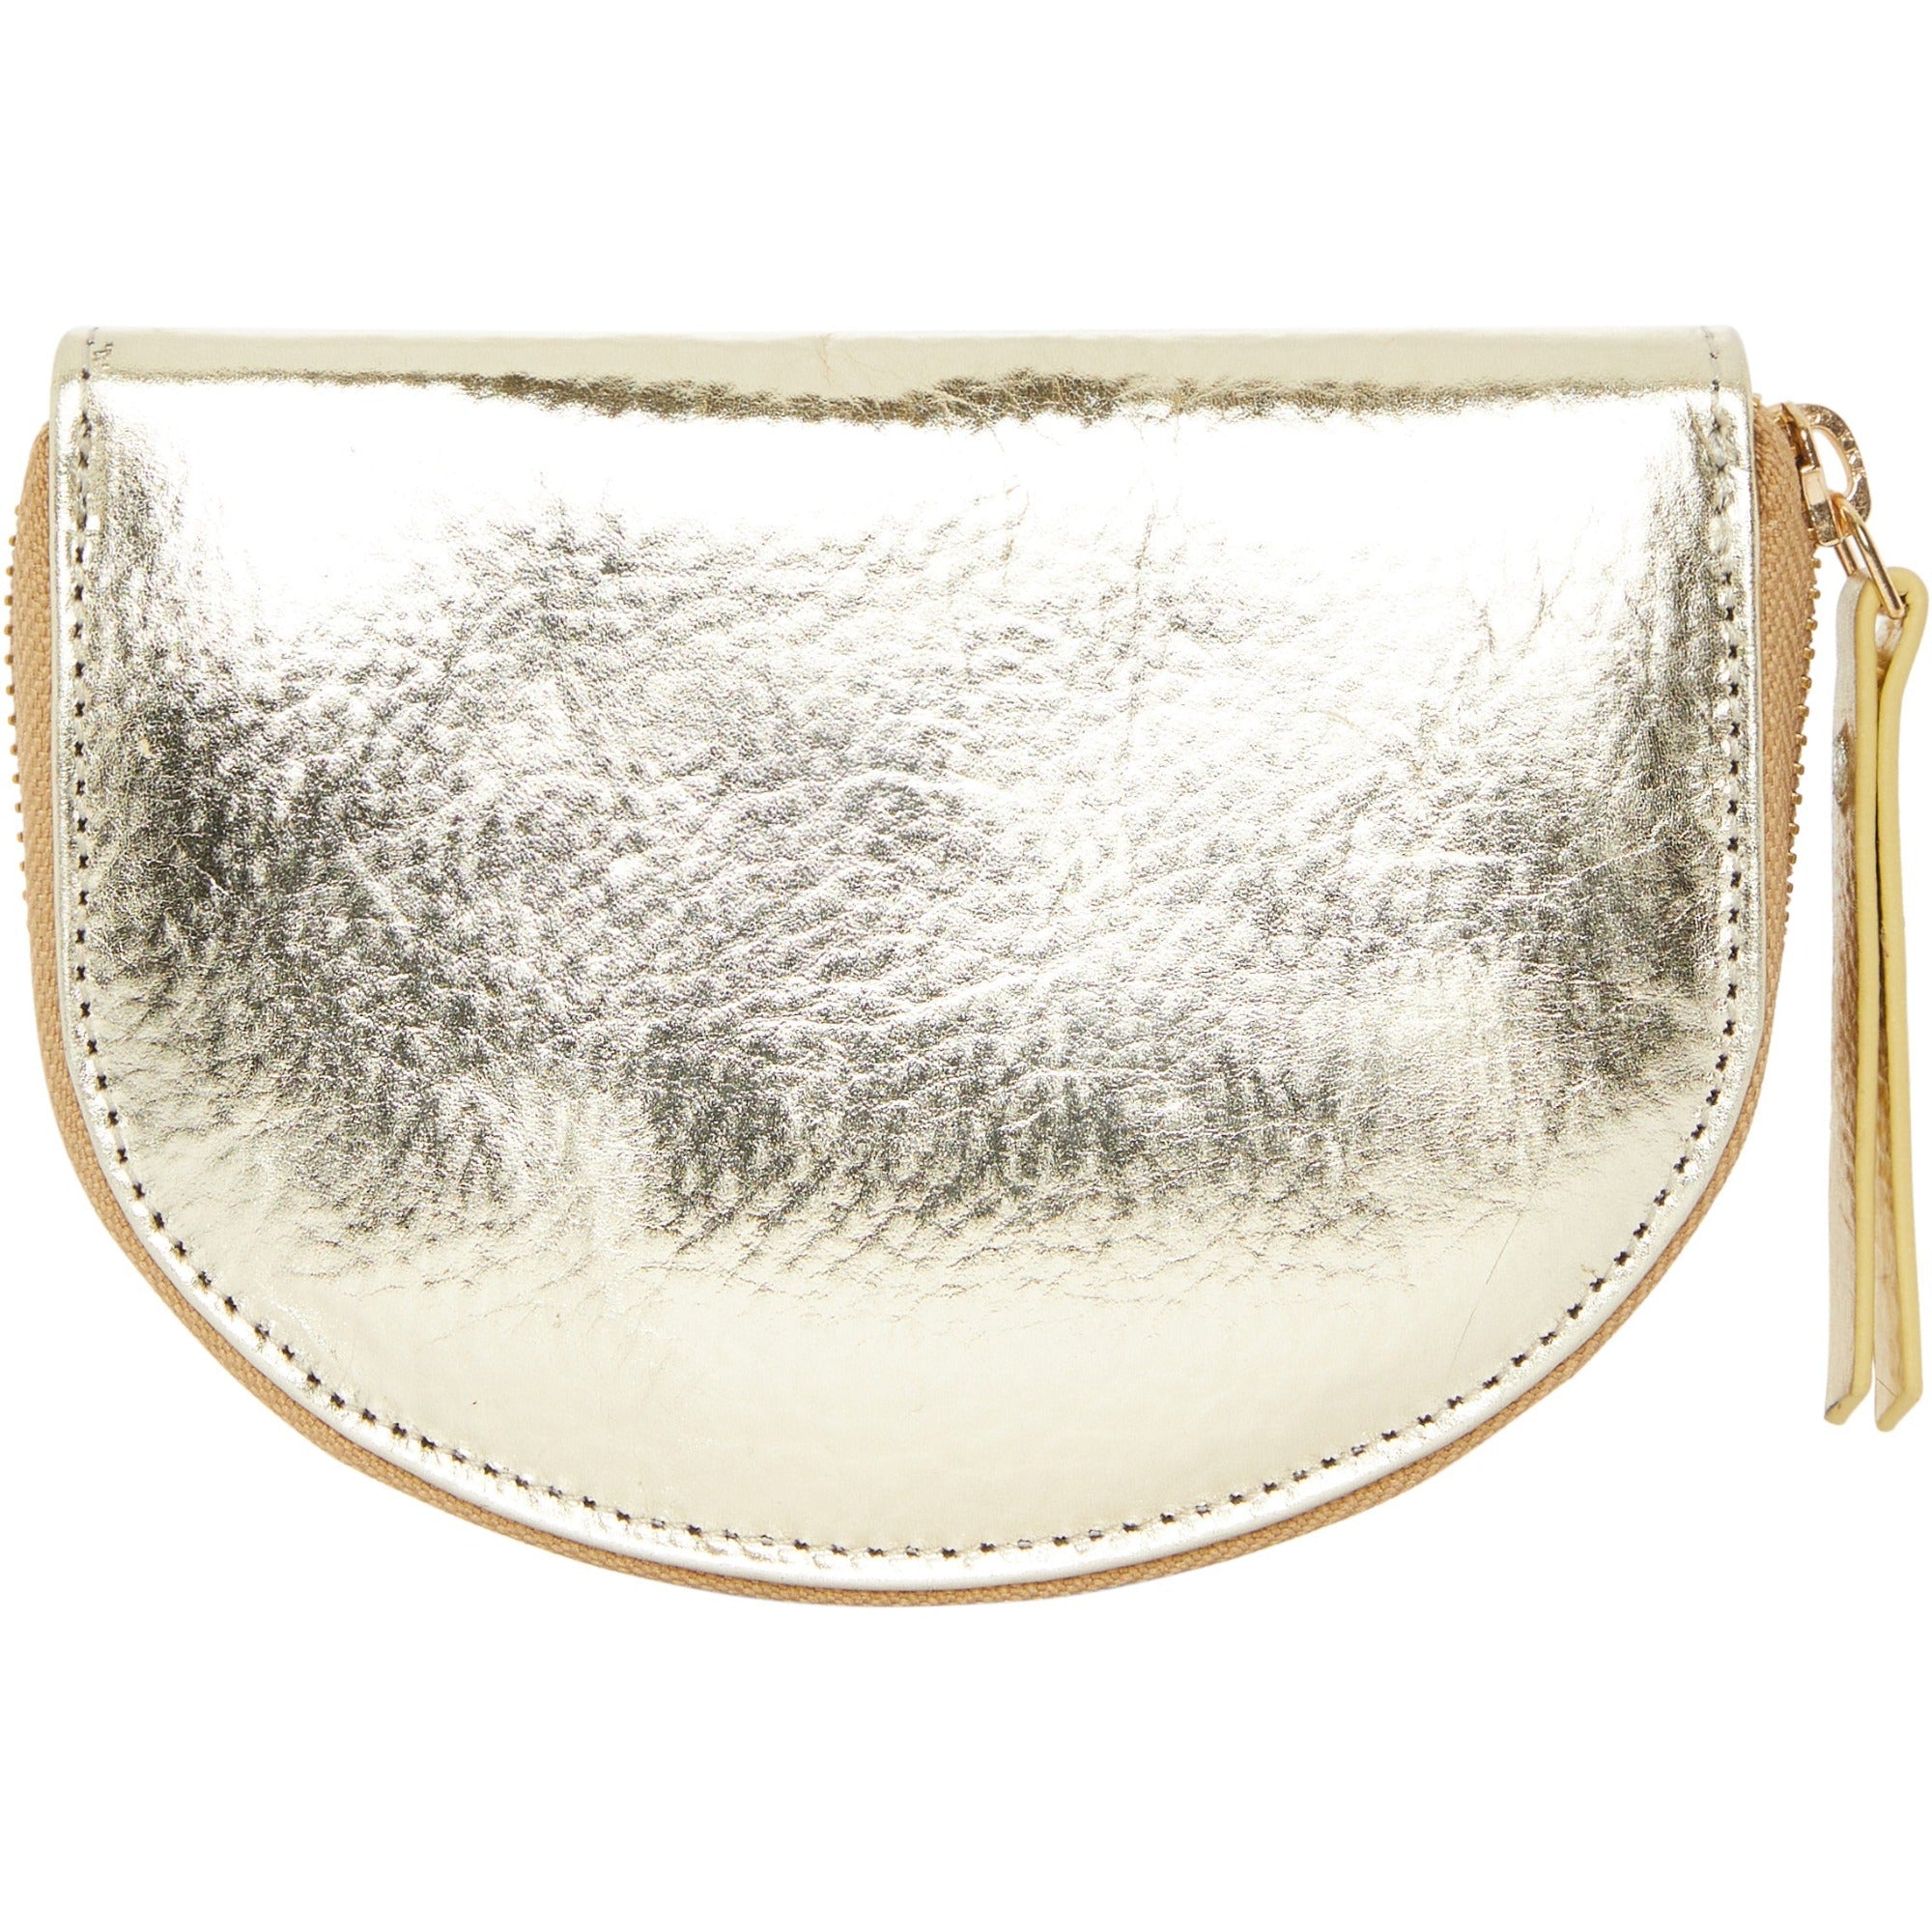 gold-leather-purse-brixbailey.jpg